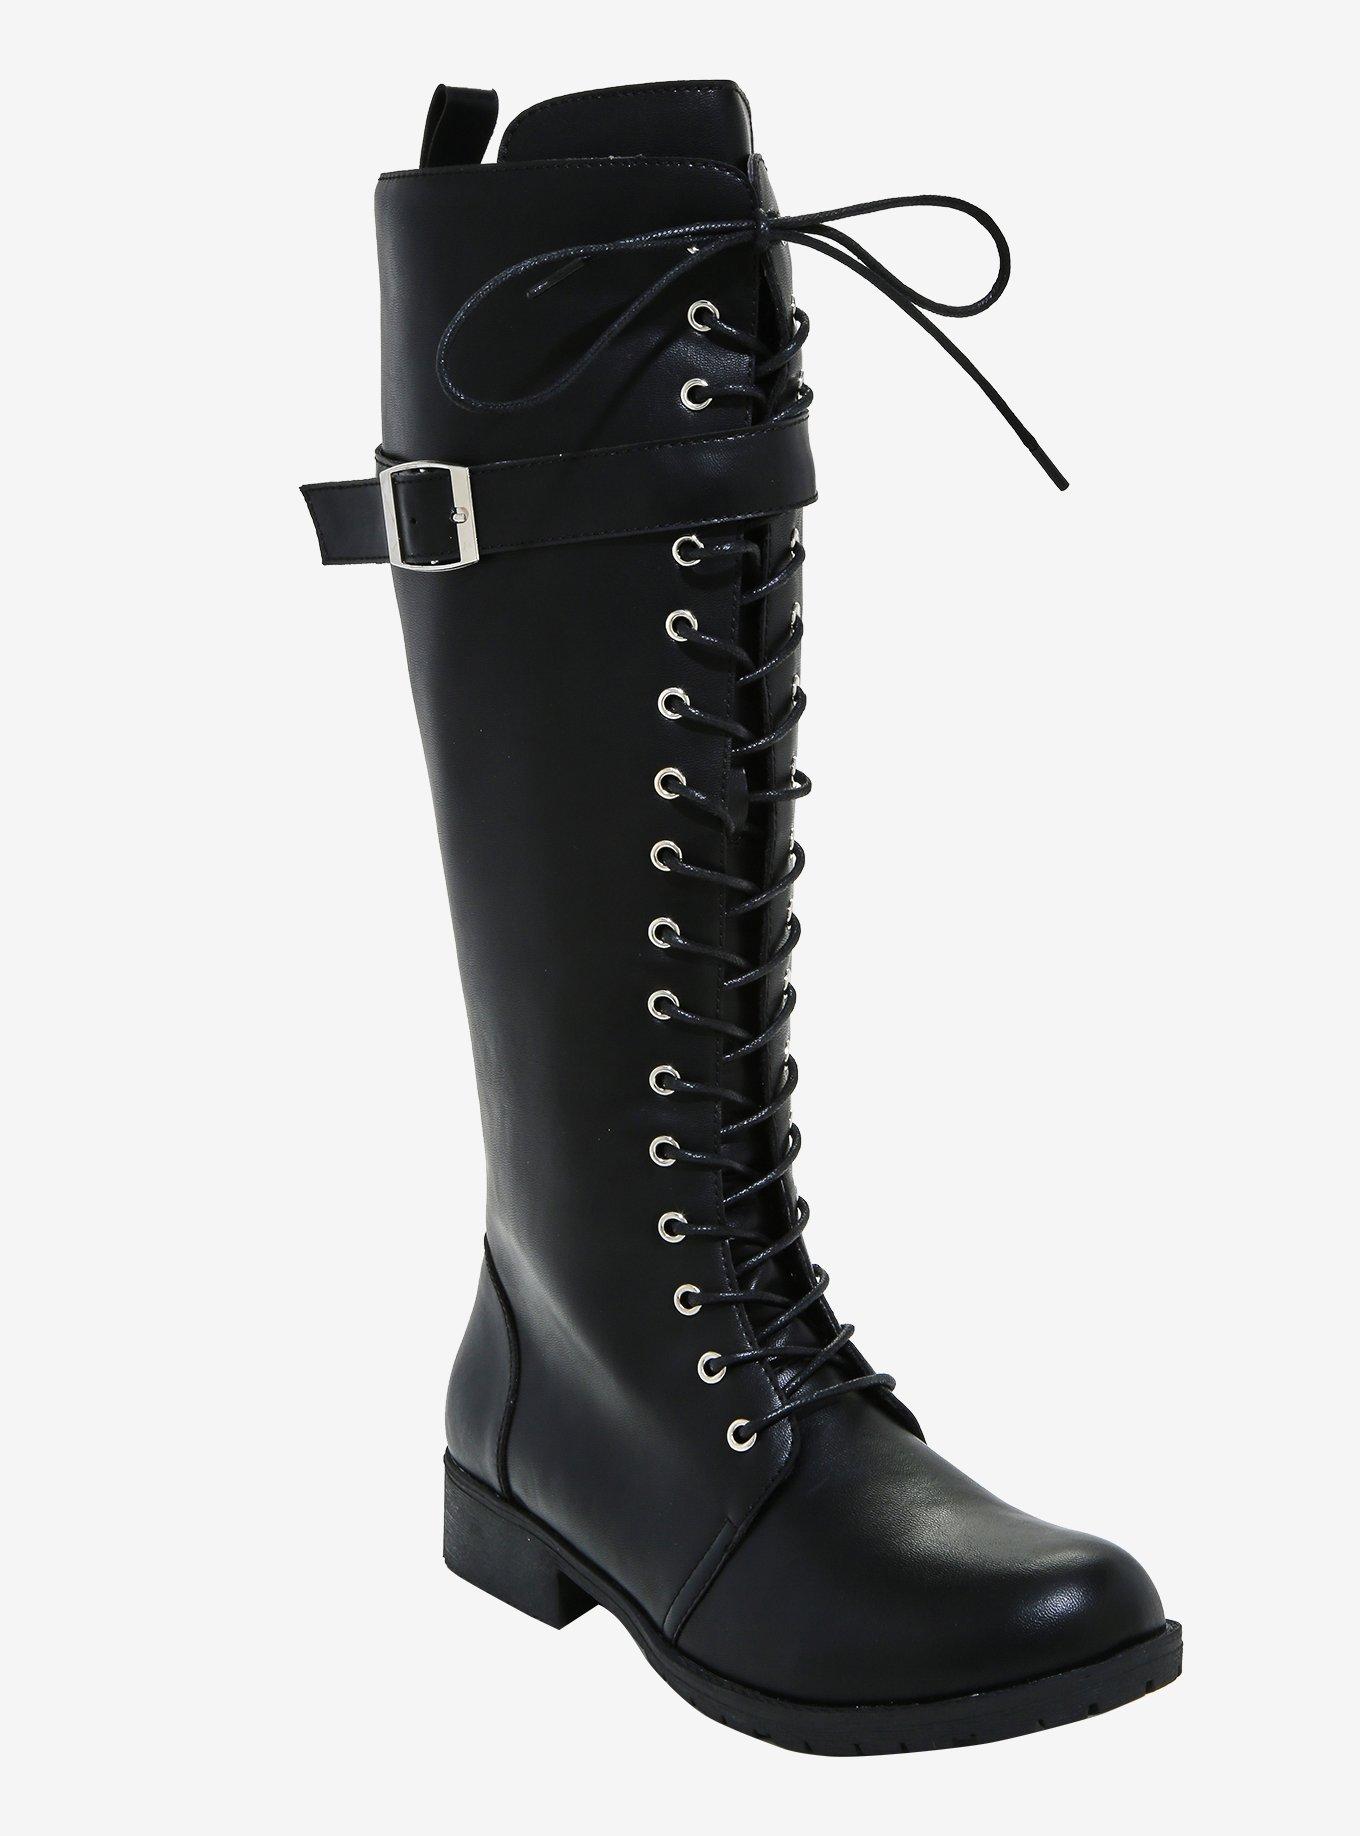 Step Into The Bad Side Knee-High Buckle Boots, BLACK, hi-res